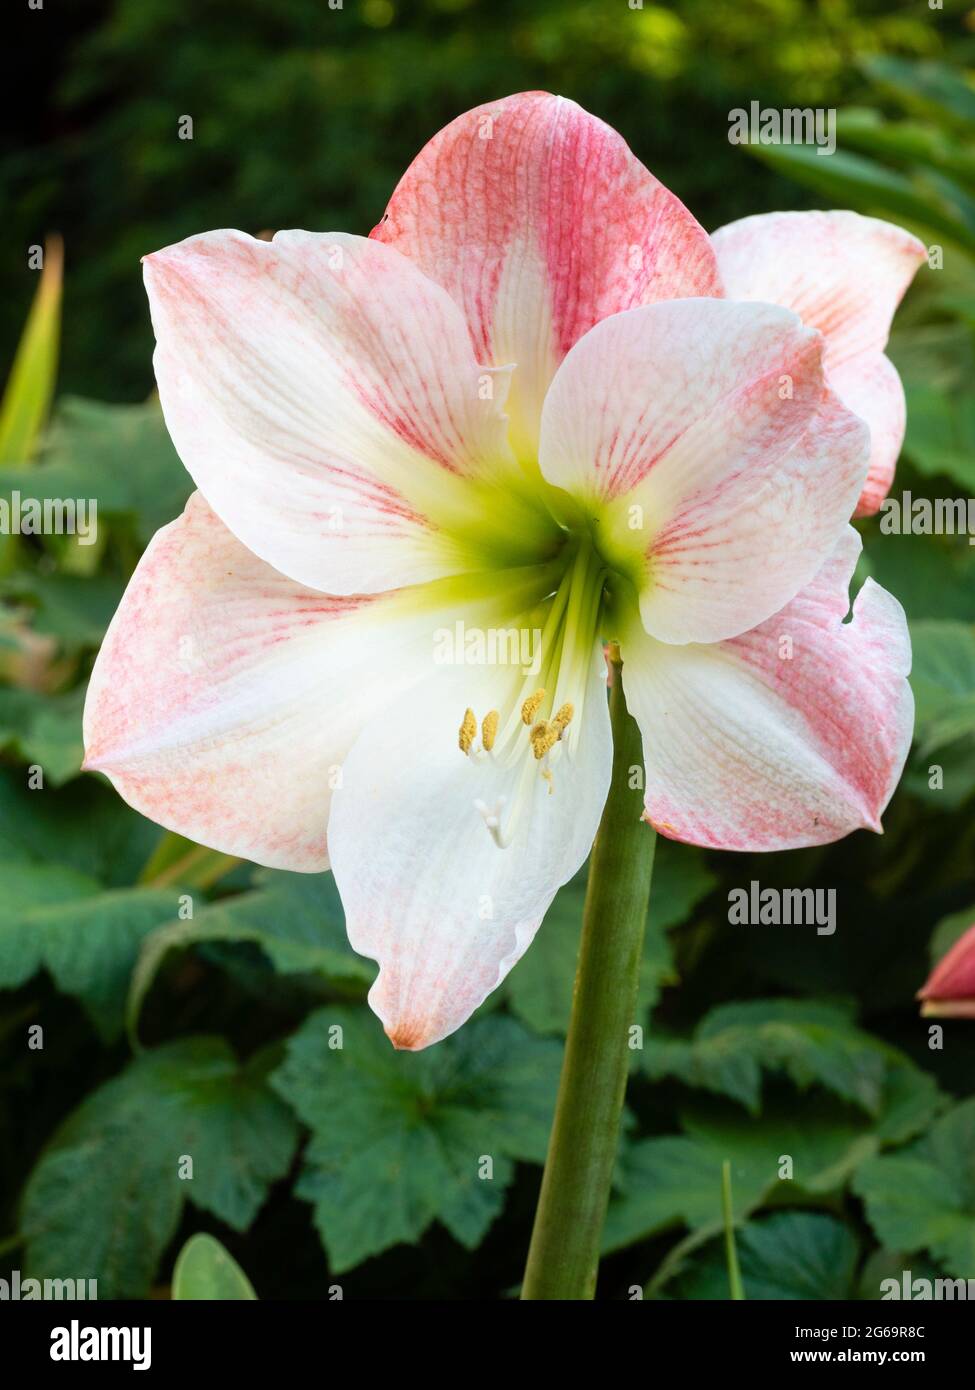 White and pink flower of Hippeastrum 'Apple Blossom' (amaryllis) blooming as a summer visitor outside in June in a Plymouth, UK garden Stock Photo